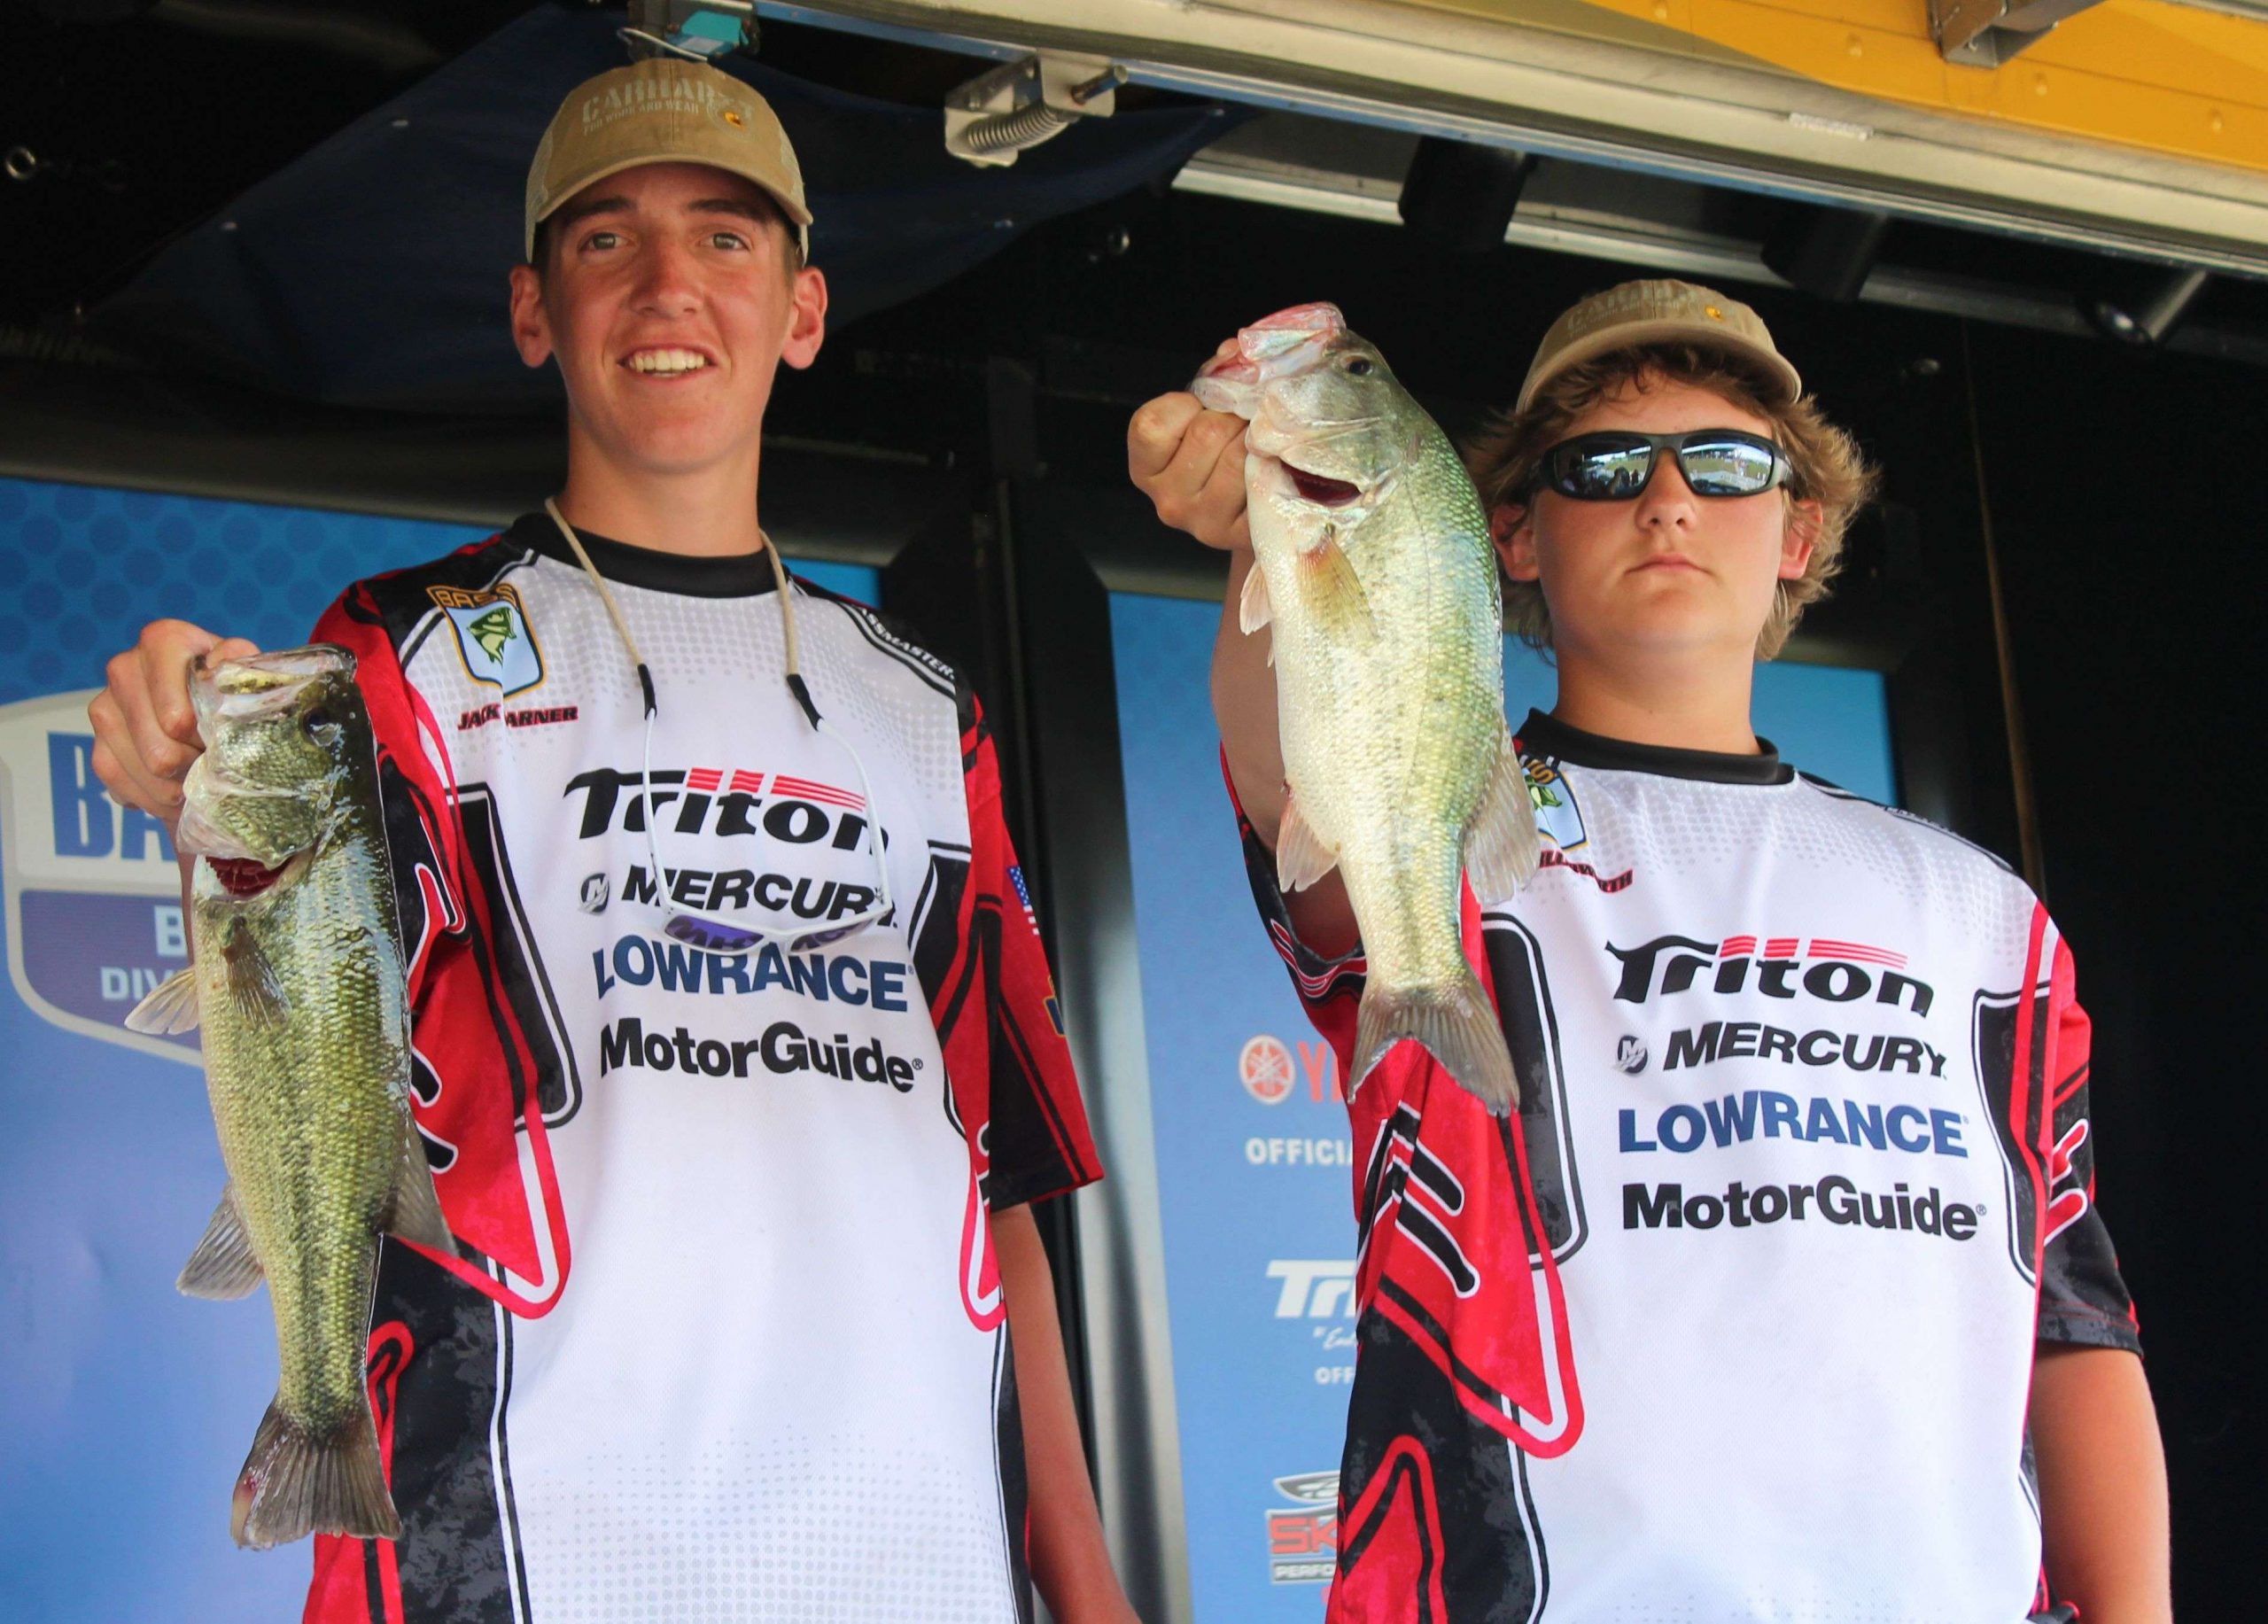 Texas B.A.S.S. Nation high school anglers Jack Garner and Trace Bludworth caught two bass that weighed a combined 4-14.
